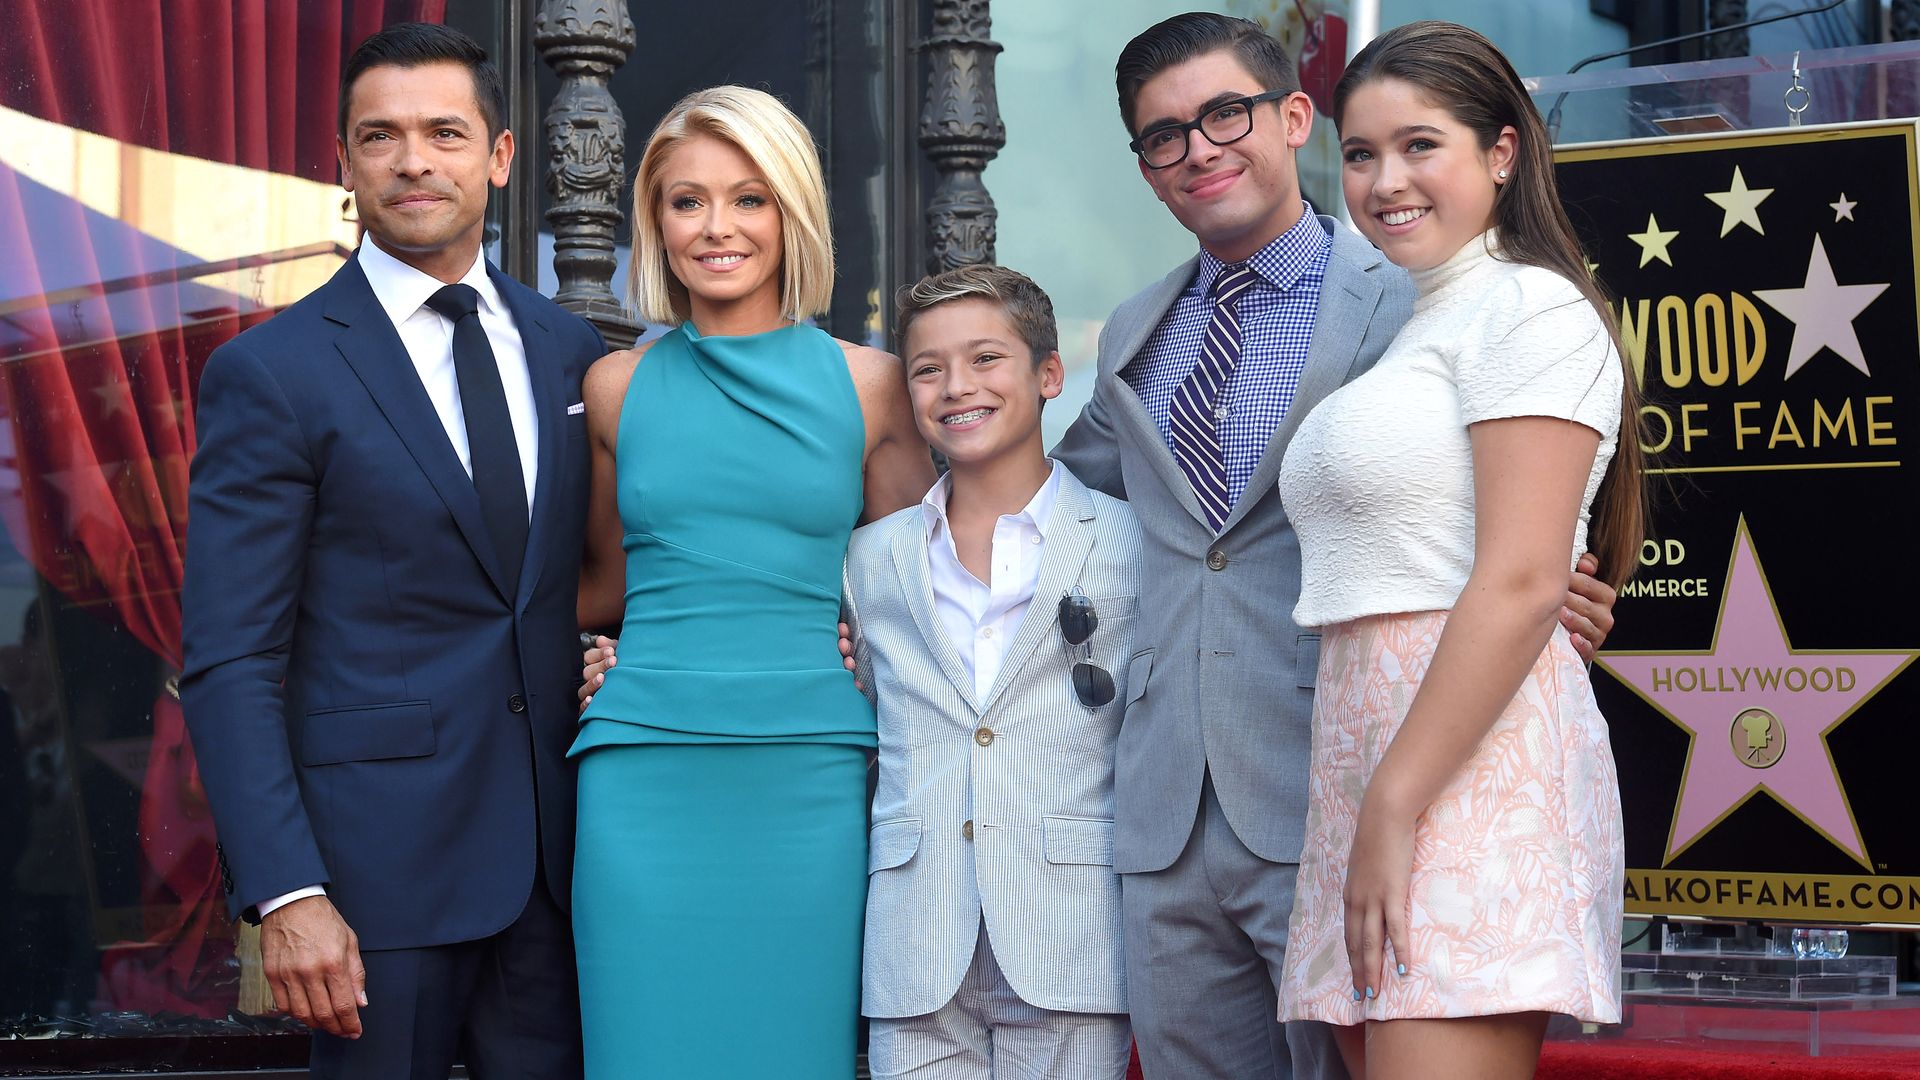 Kelly, Mark and their three children smiling on a red carpet